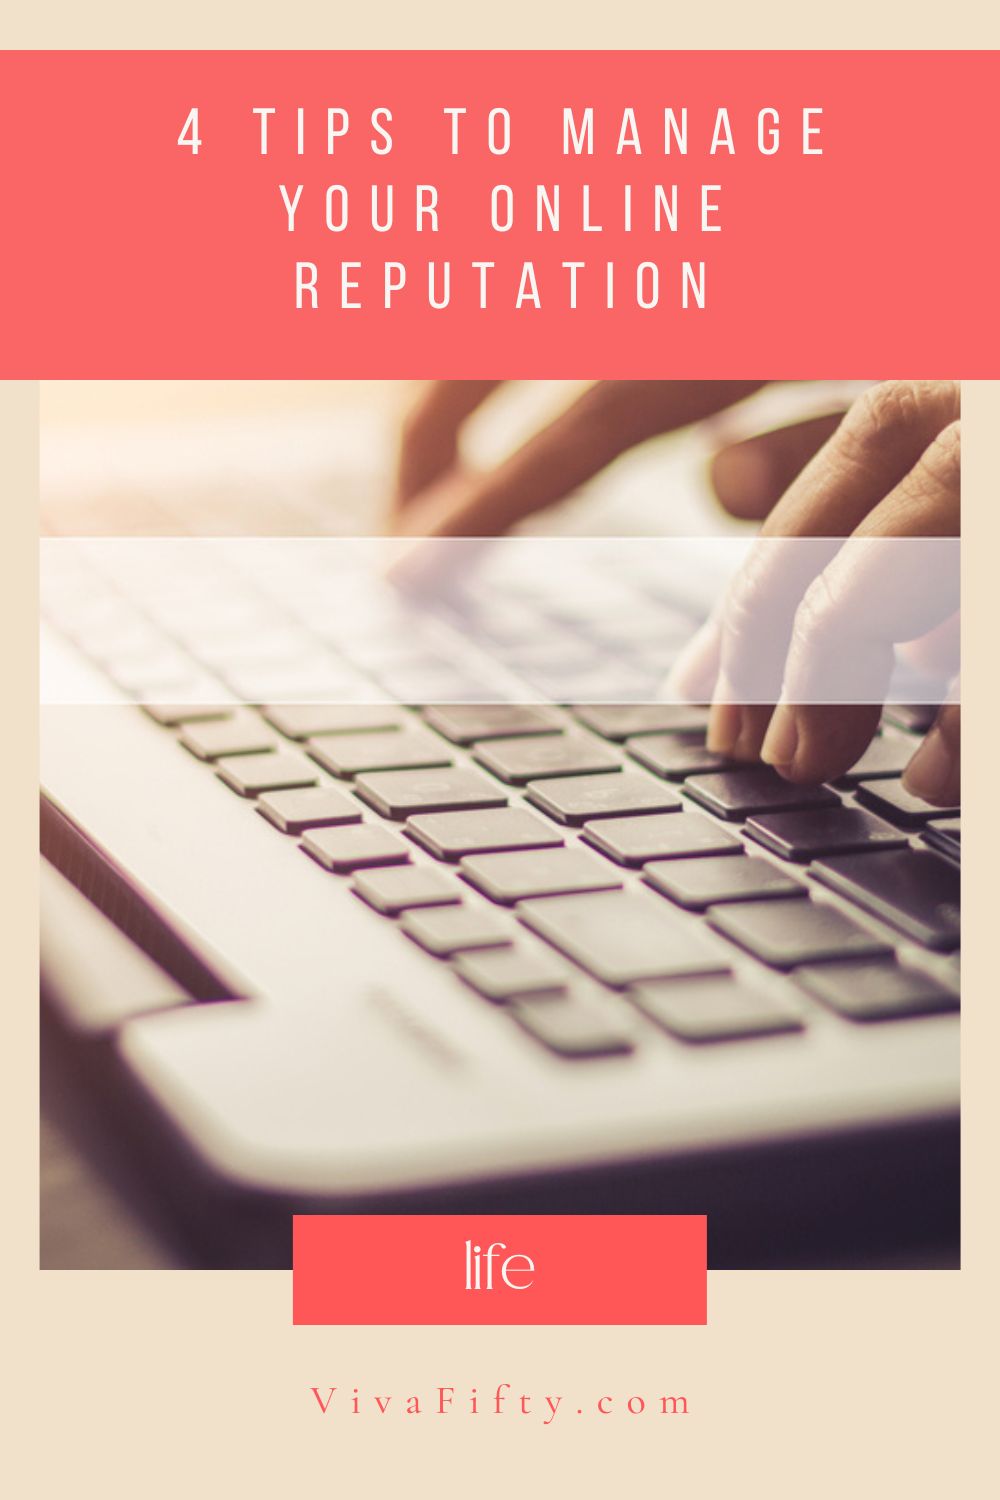 If you haven´t Googled yourself in a while, you should! Here are 4 tips to manage your online reputation so you don’t get any surprises.